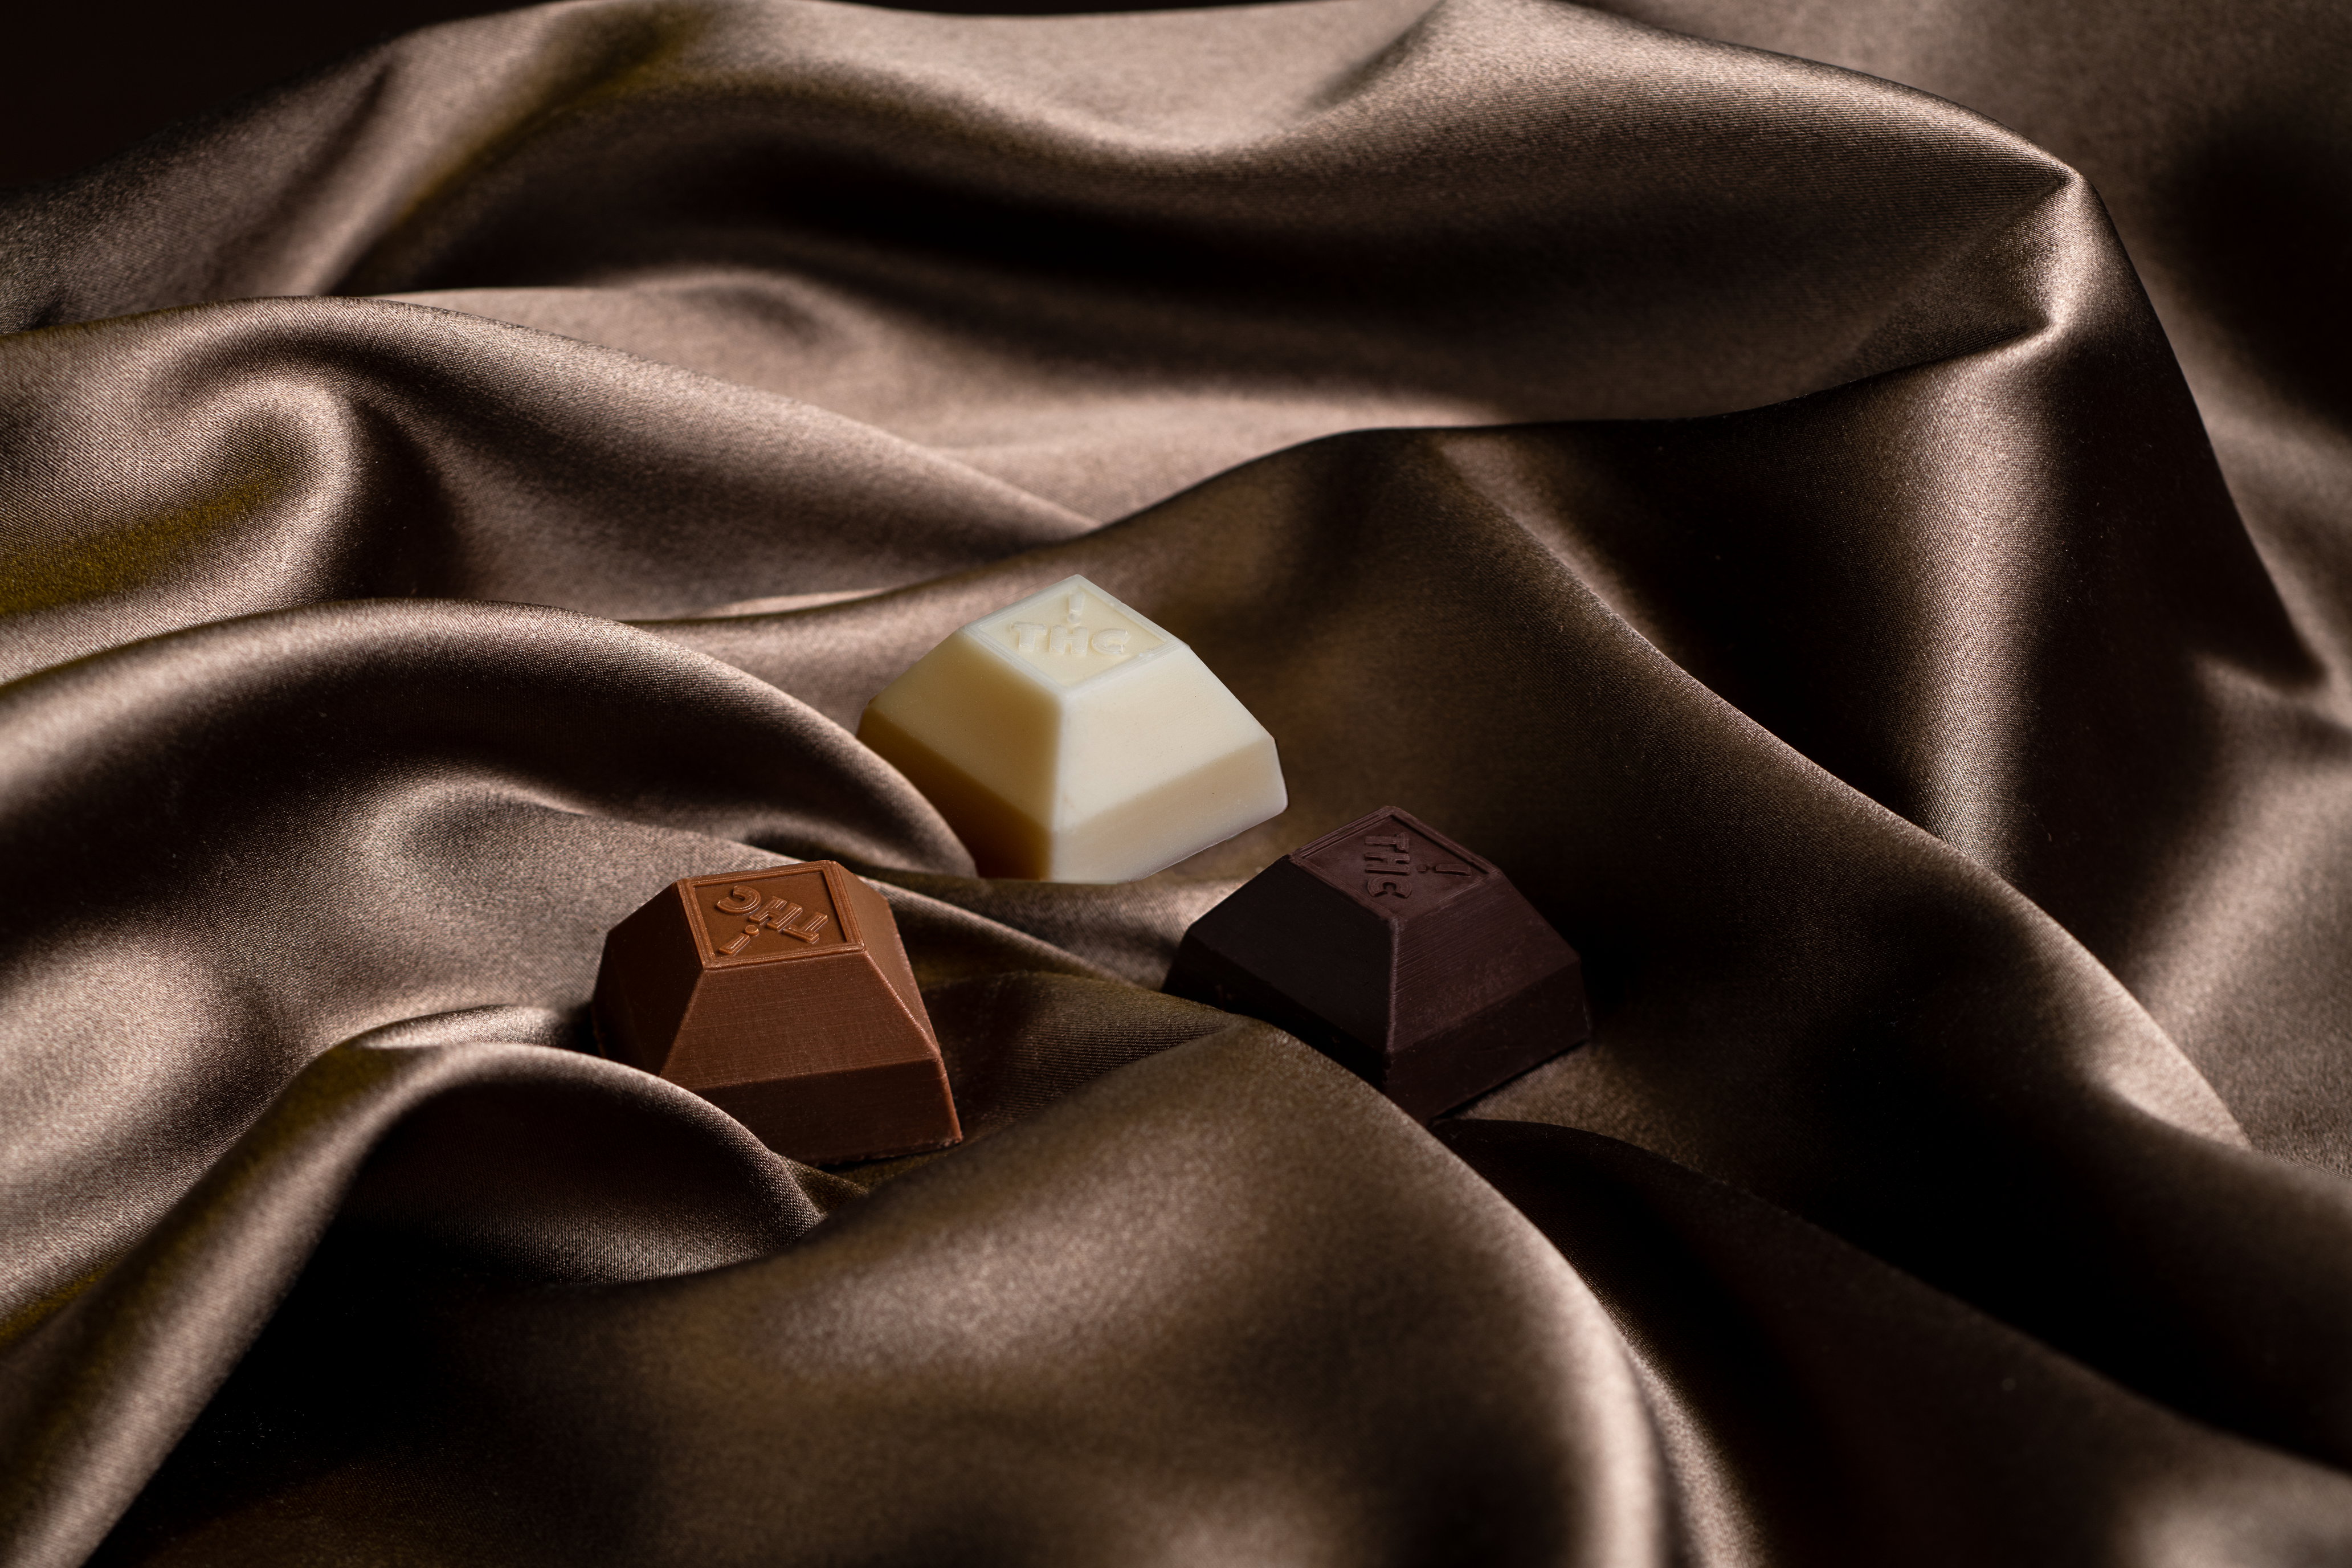 Three squares of milk, white, and dark chocolate from Nove, resting on silk.